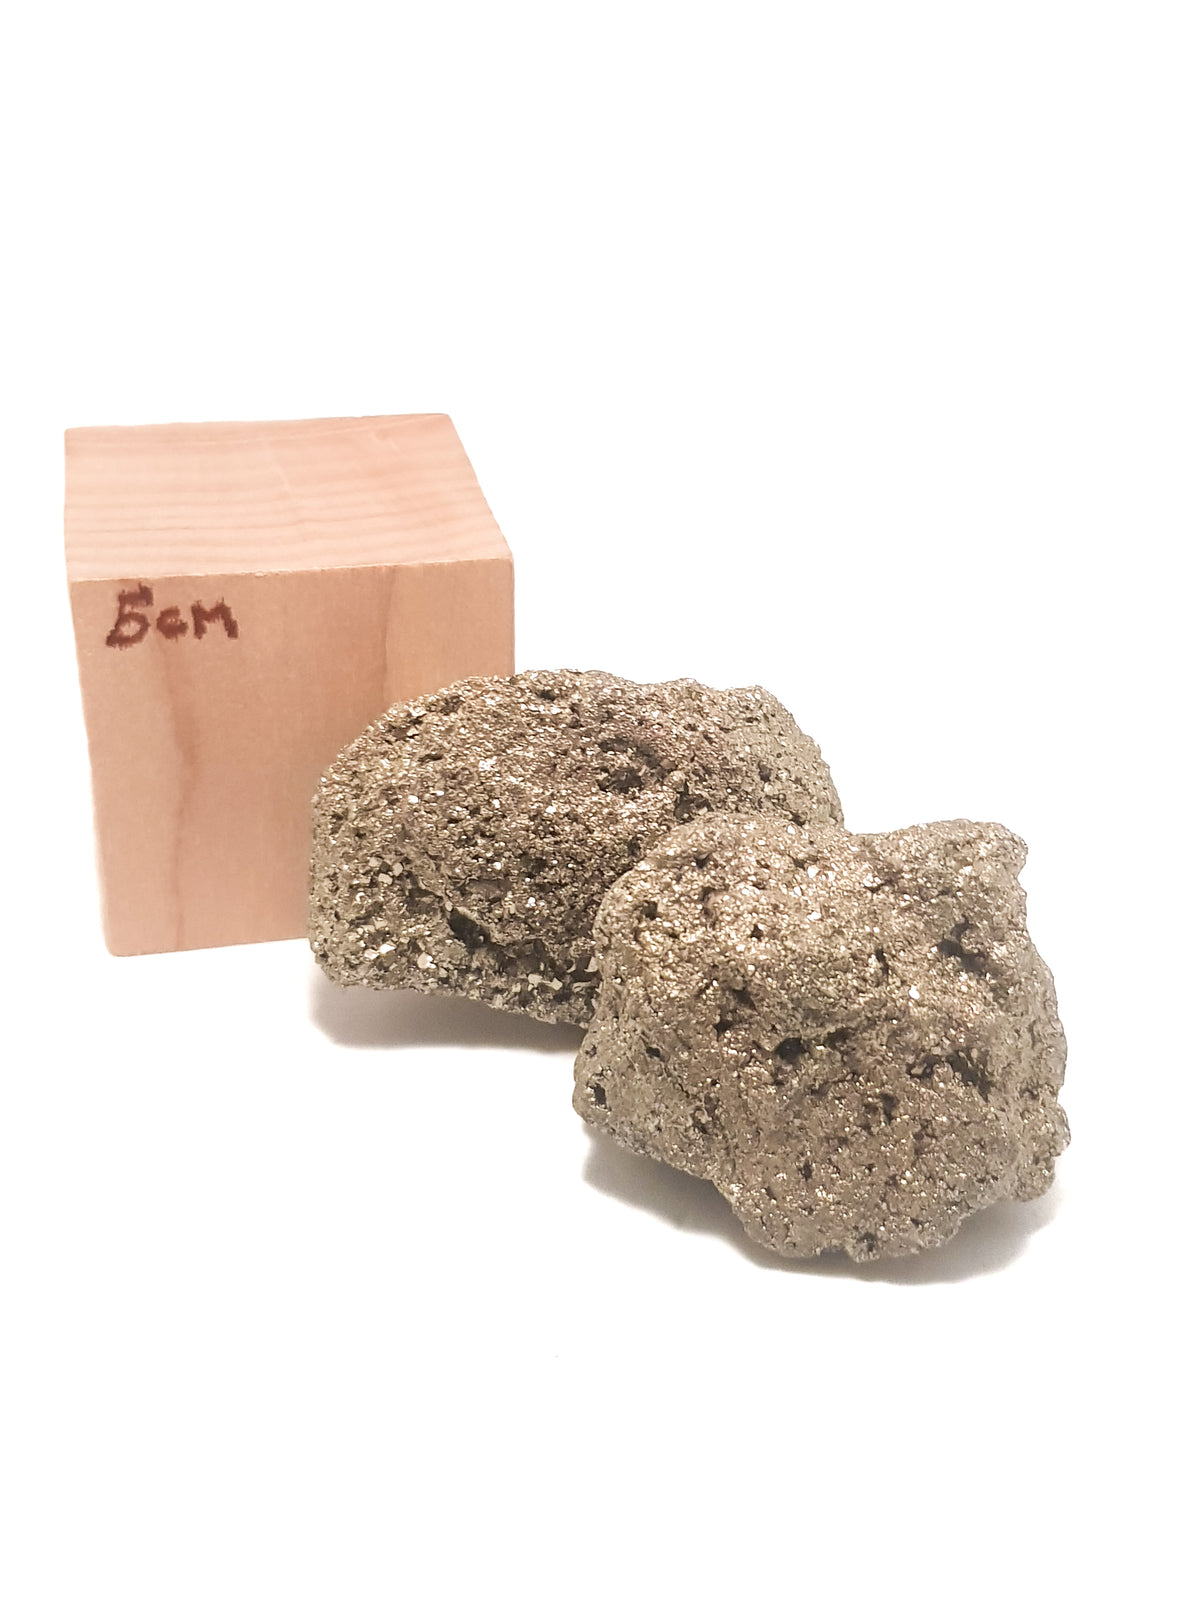 two iron pyrite &quot;cocos&quot;. They are placed next to a 5cm cube for scale